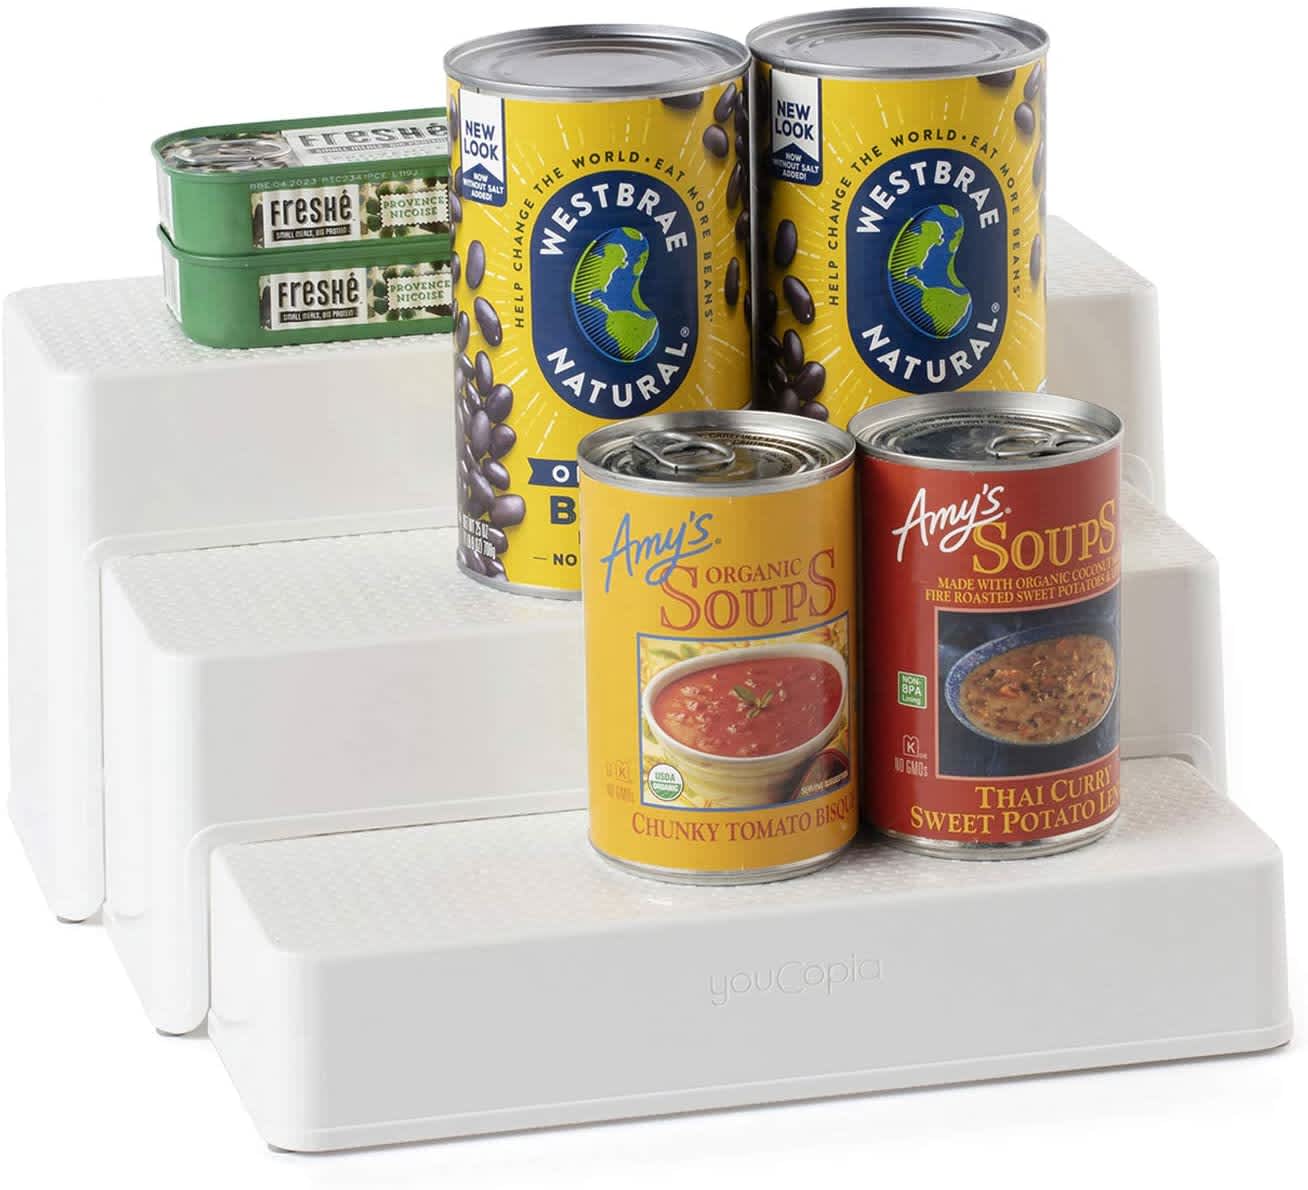 DIY Canned Goods Storage - The Prepared Page